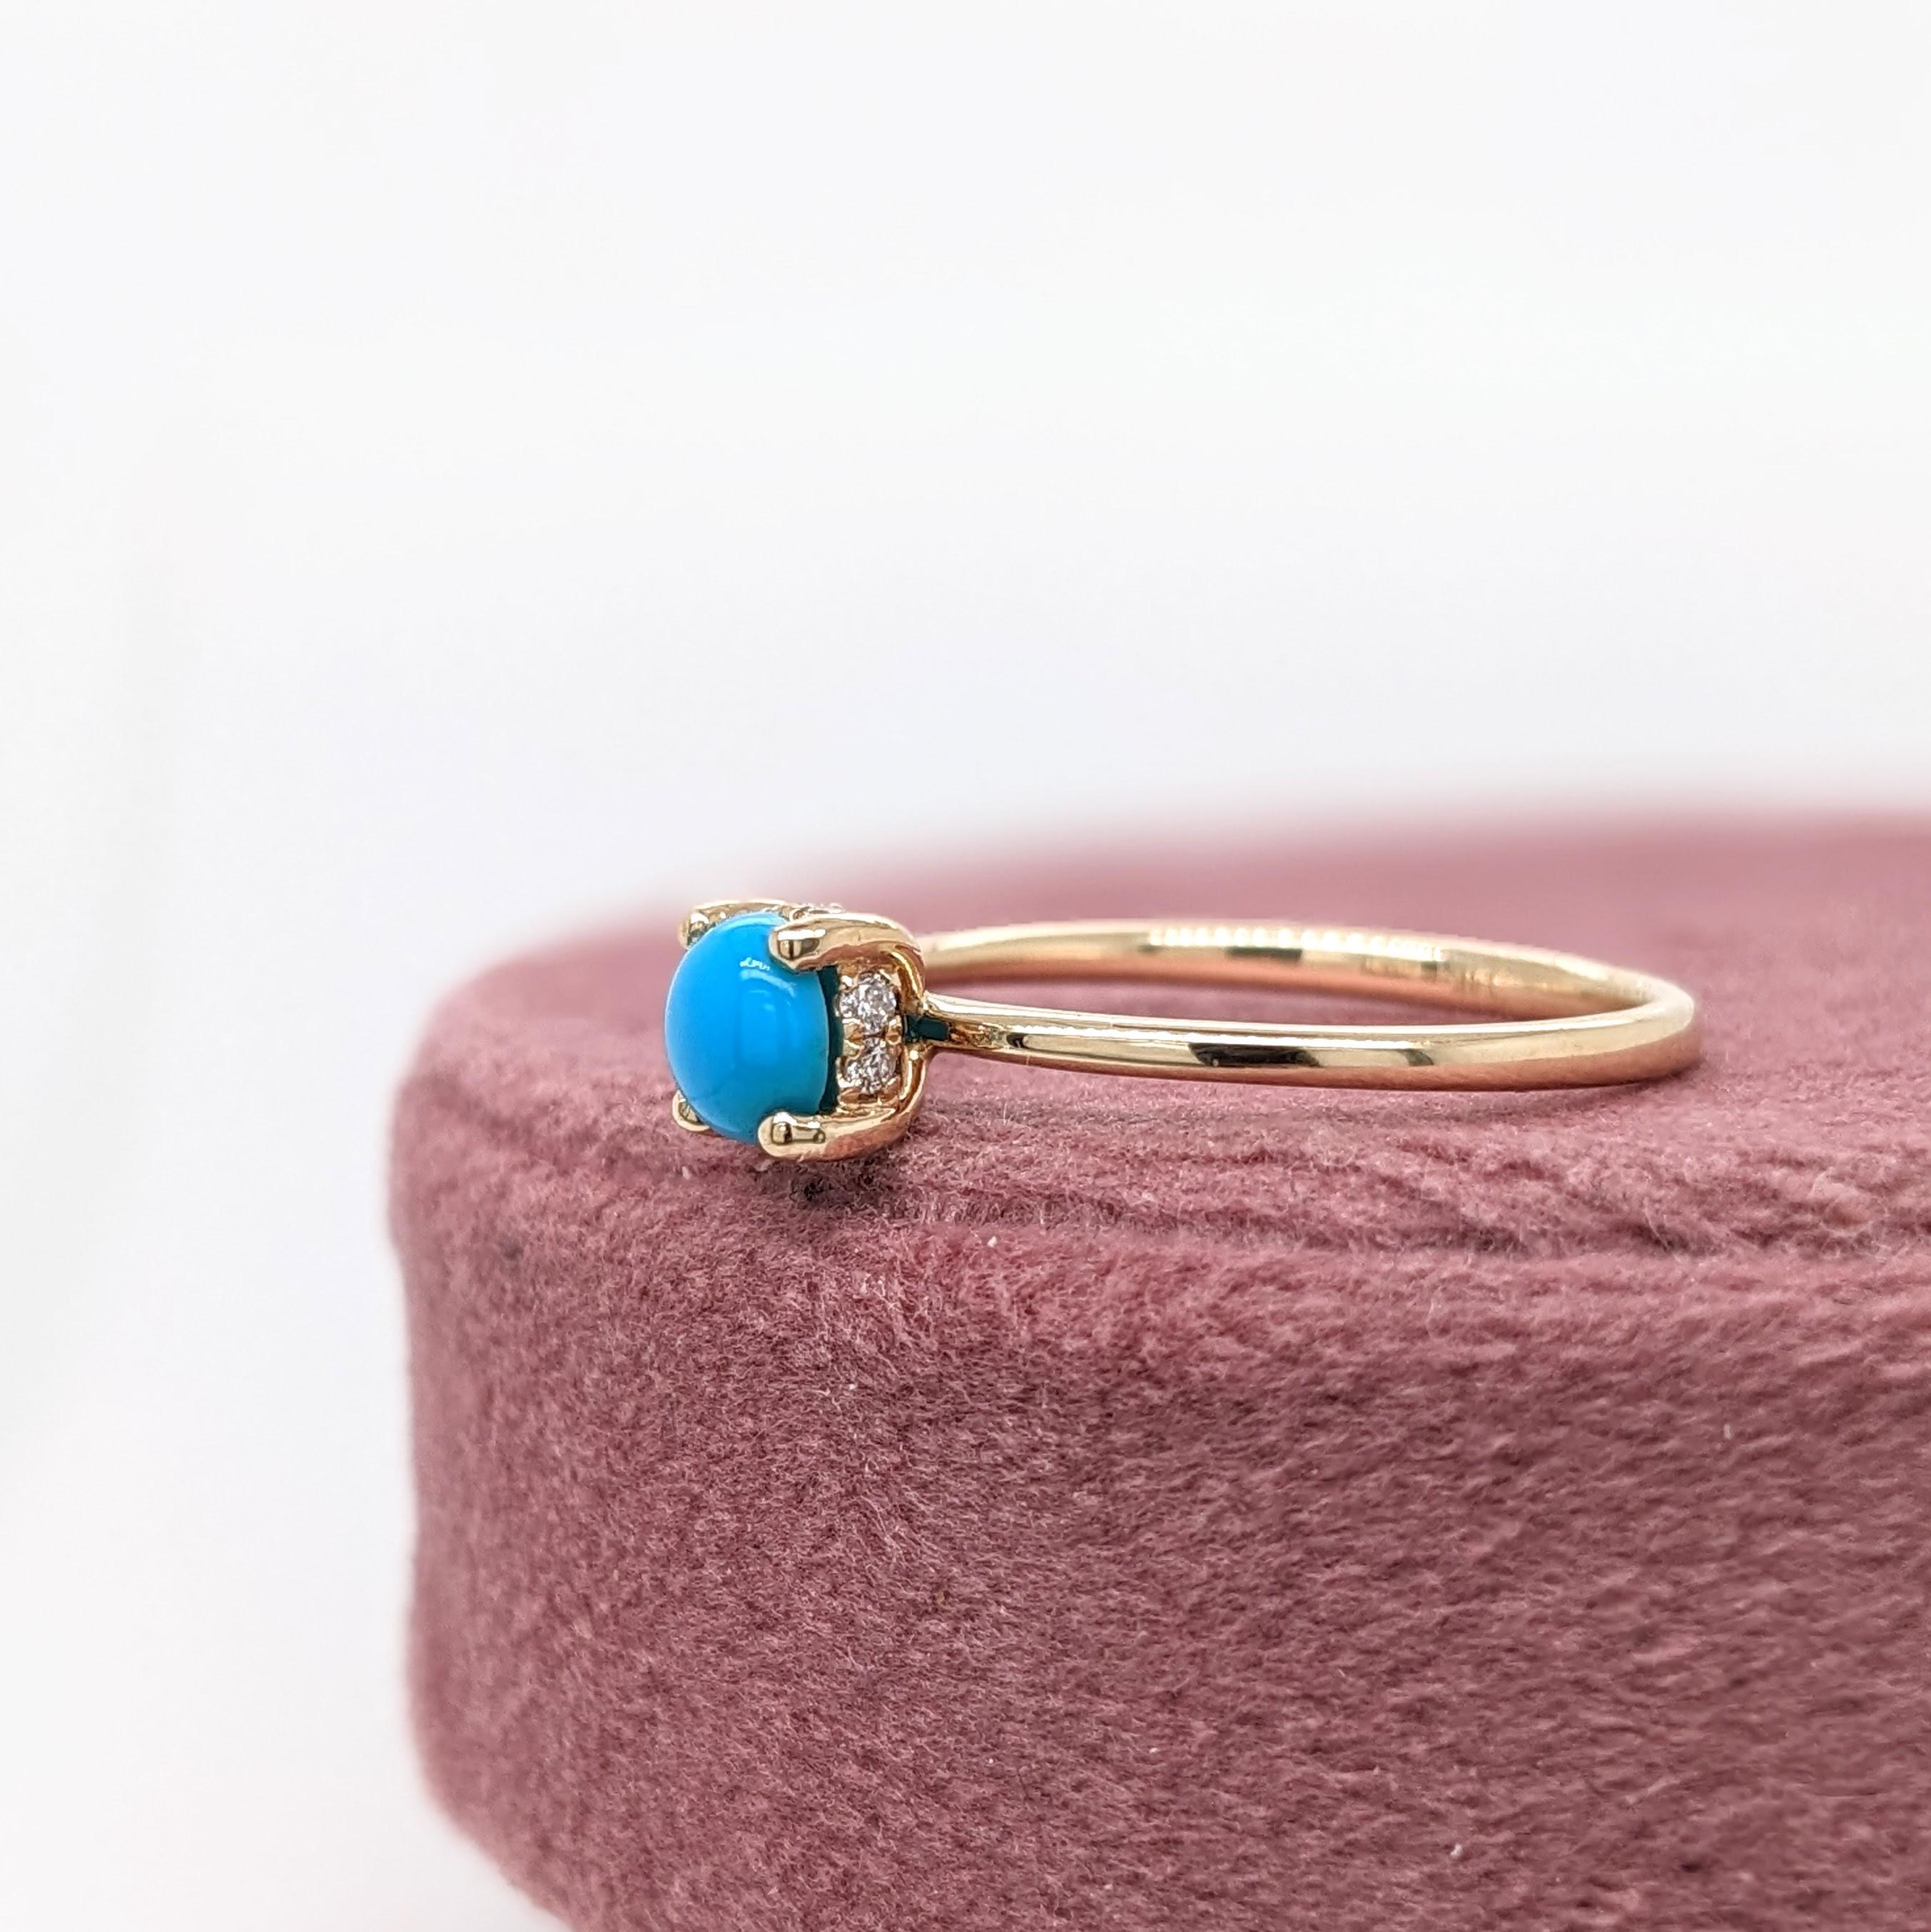 Turquoise Ring w Earth Mined Diamonds in Solid 14K Yellow Gold Round 5mm In New Condition For Sale In Columbus, OH